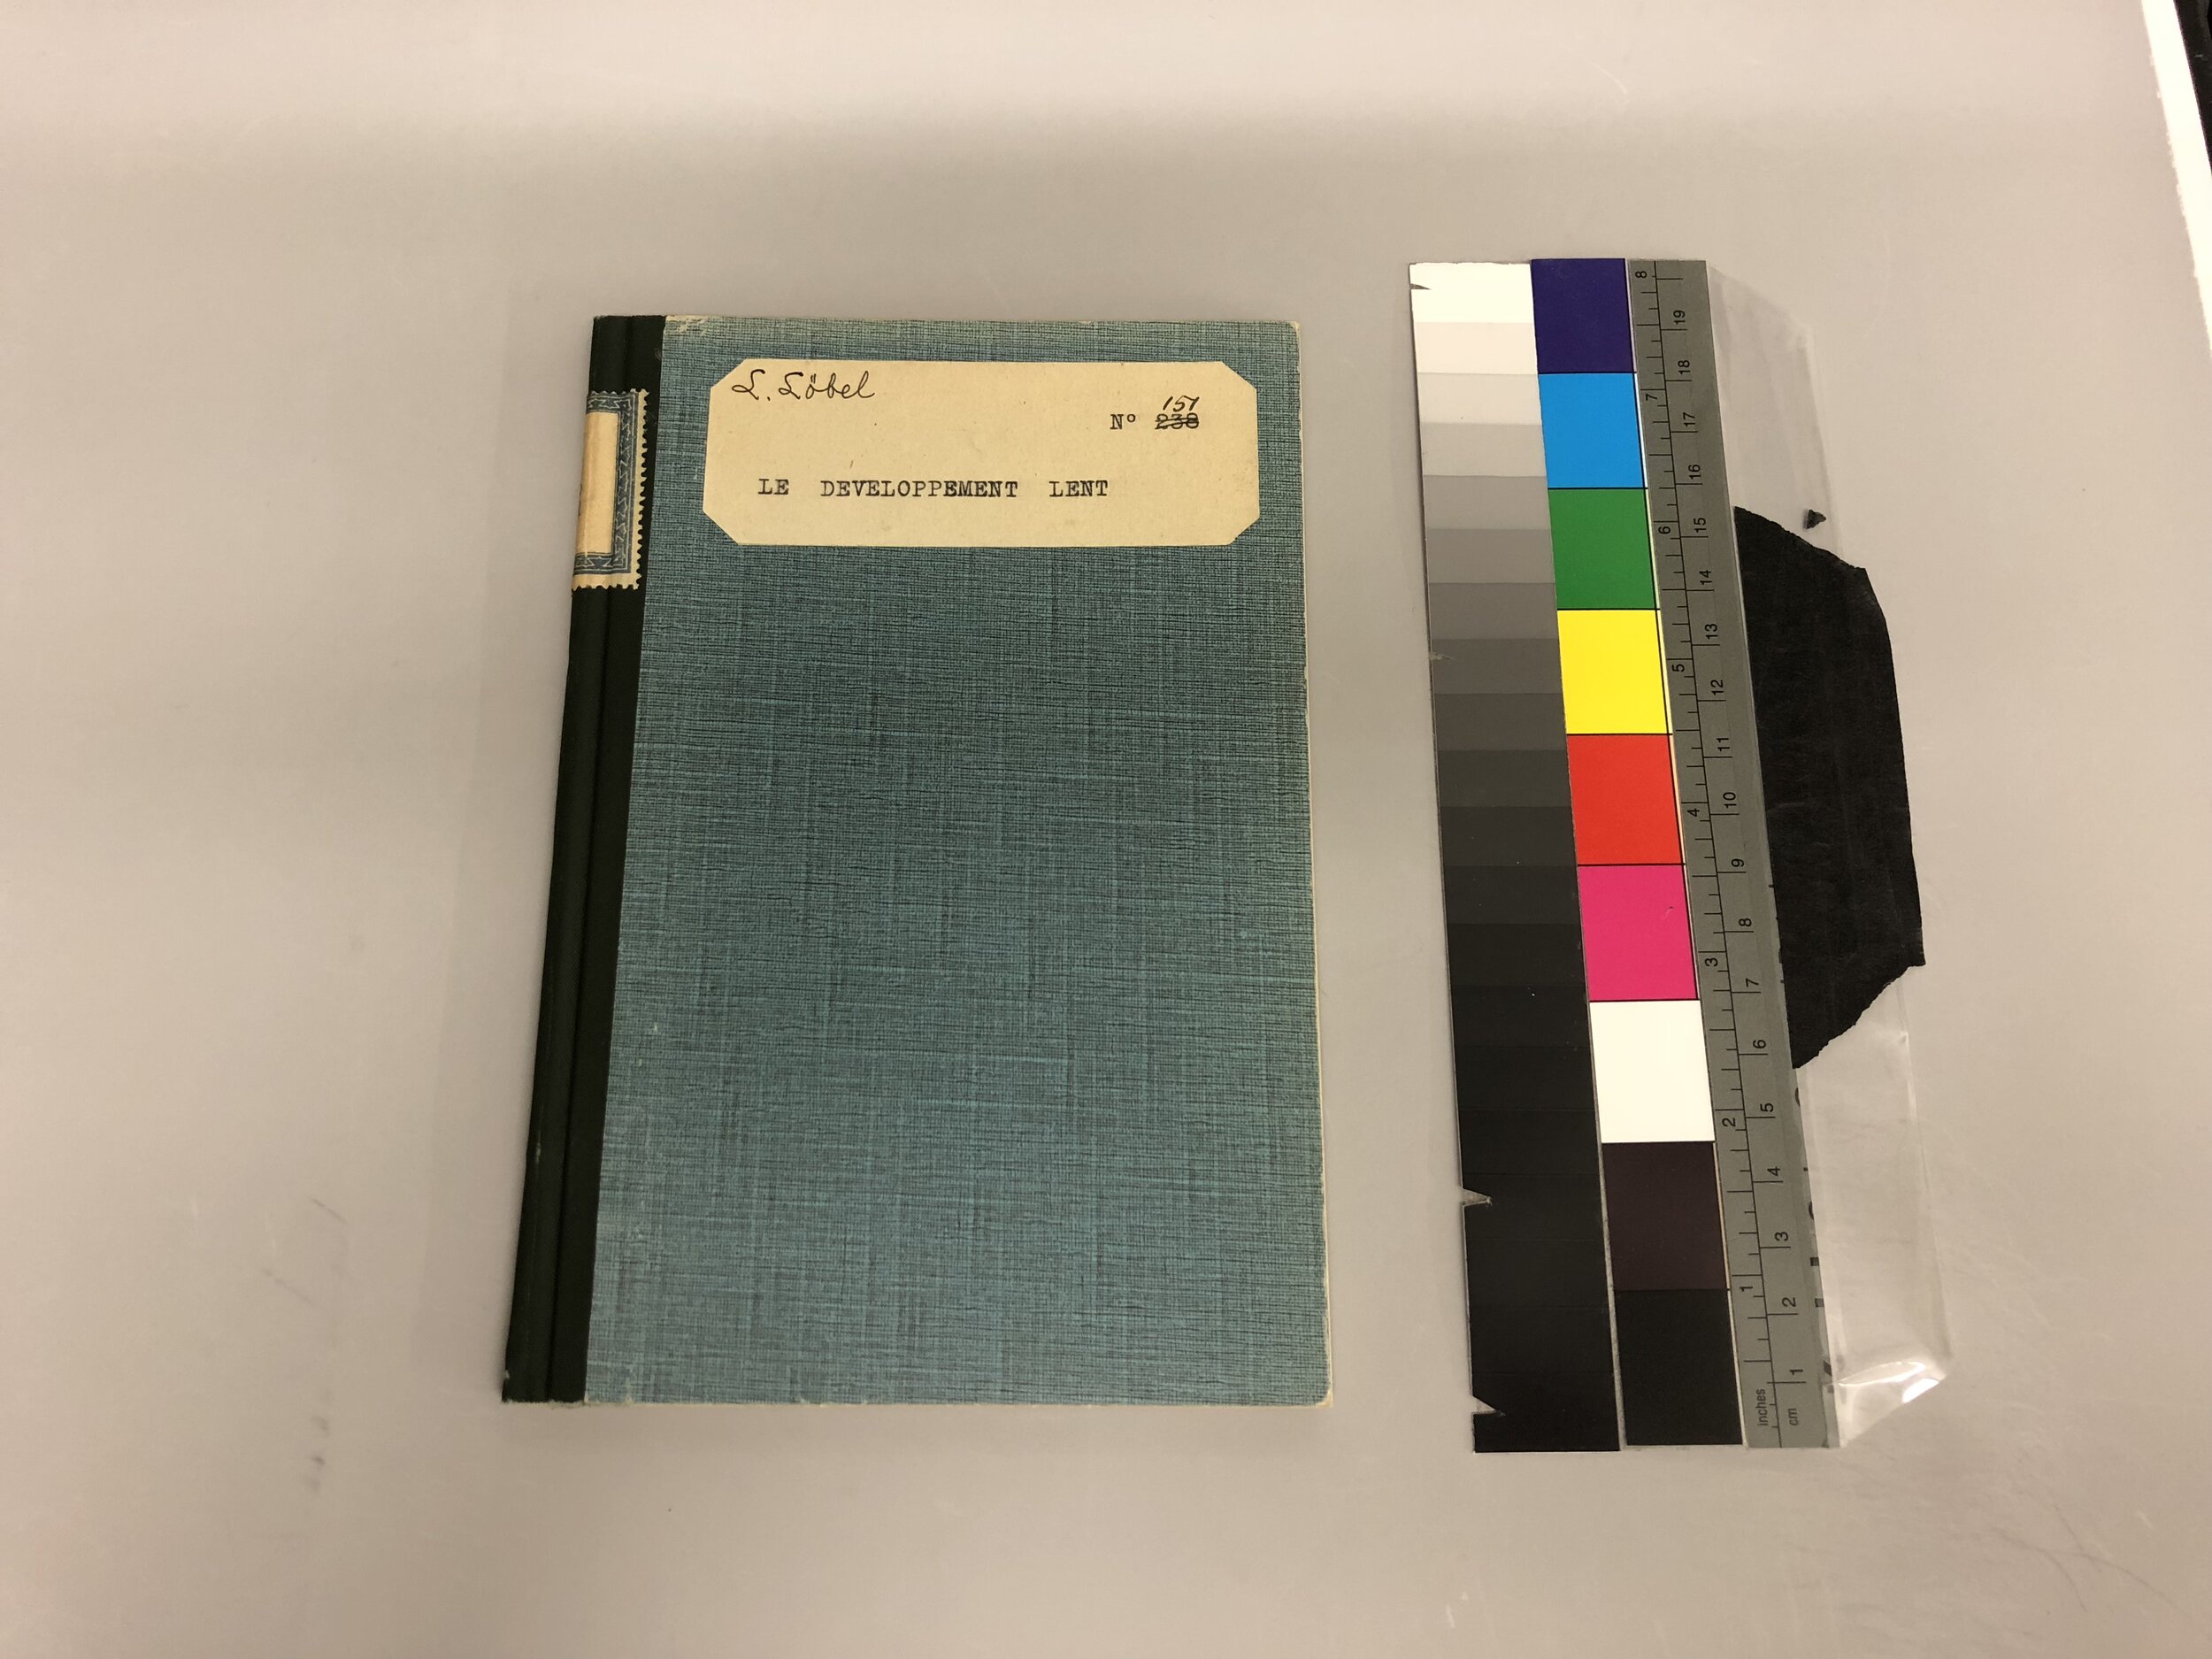   The front cover of     Le développement lent       next to a Kodak color target used during imaging.   